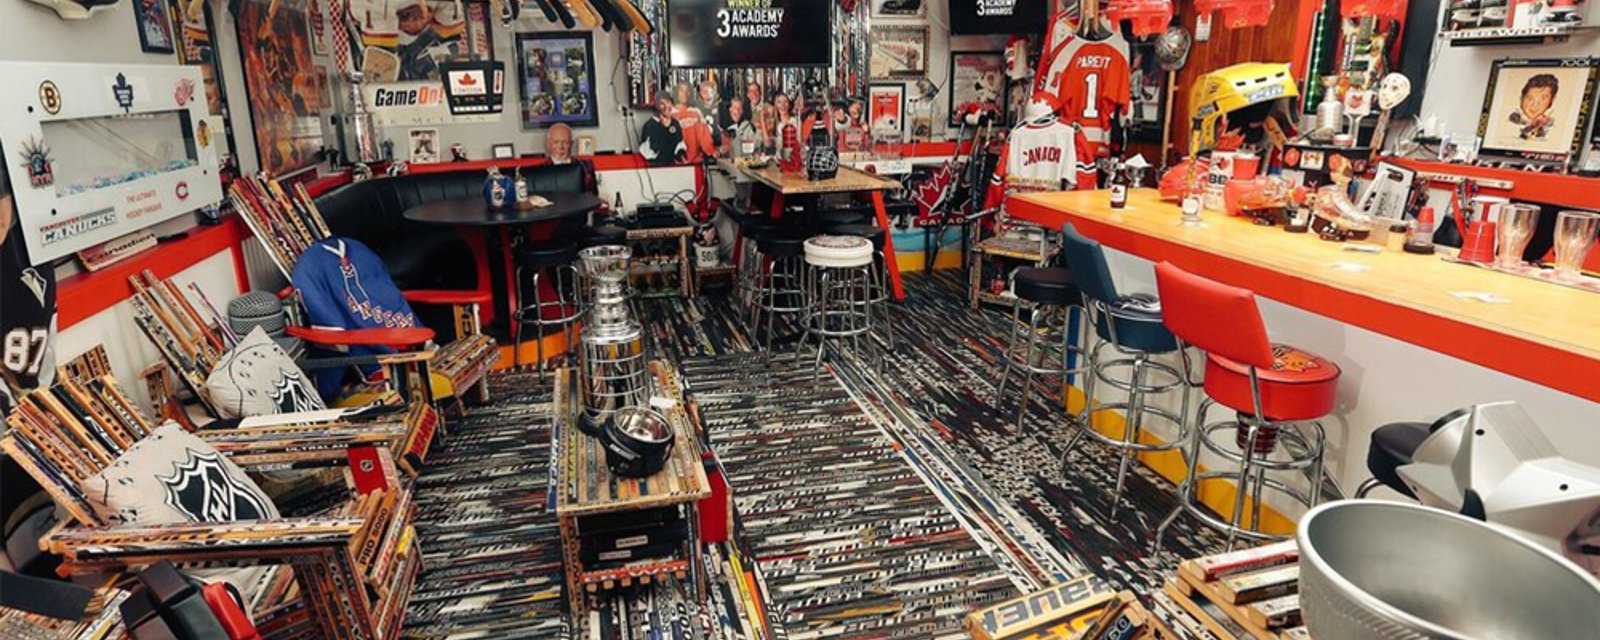 Check out the ultimate hockey fan cave